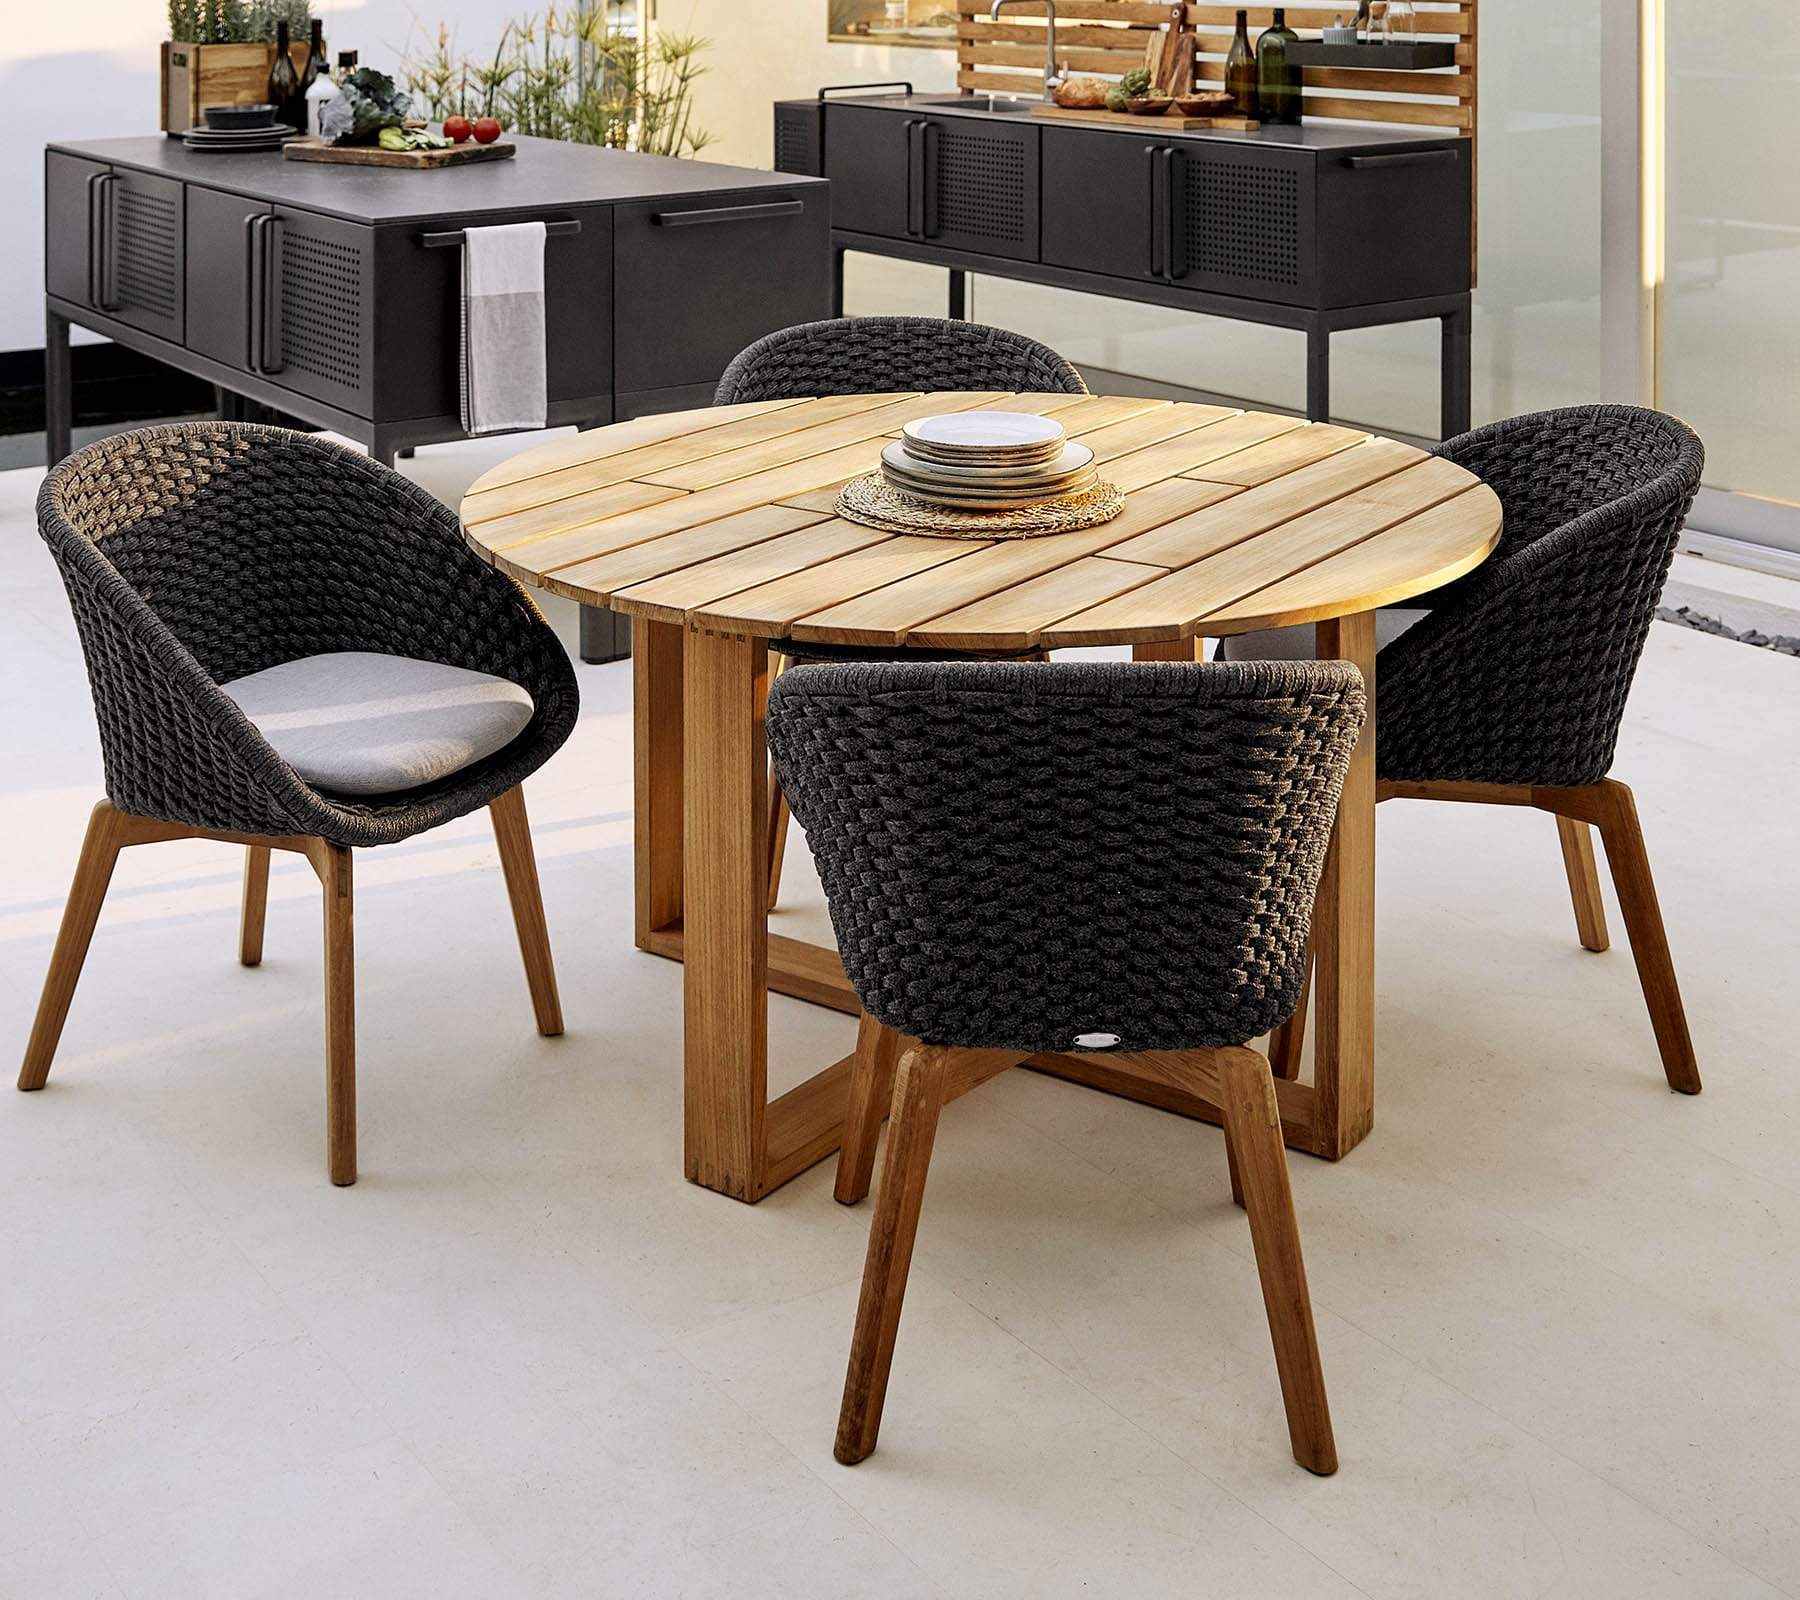 Boxhill's Endless Outdoor Round Dining Table lifestyle image with 4 dining chairs and Drop Outdoor Kitchen Module behind